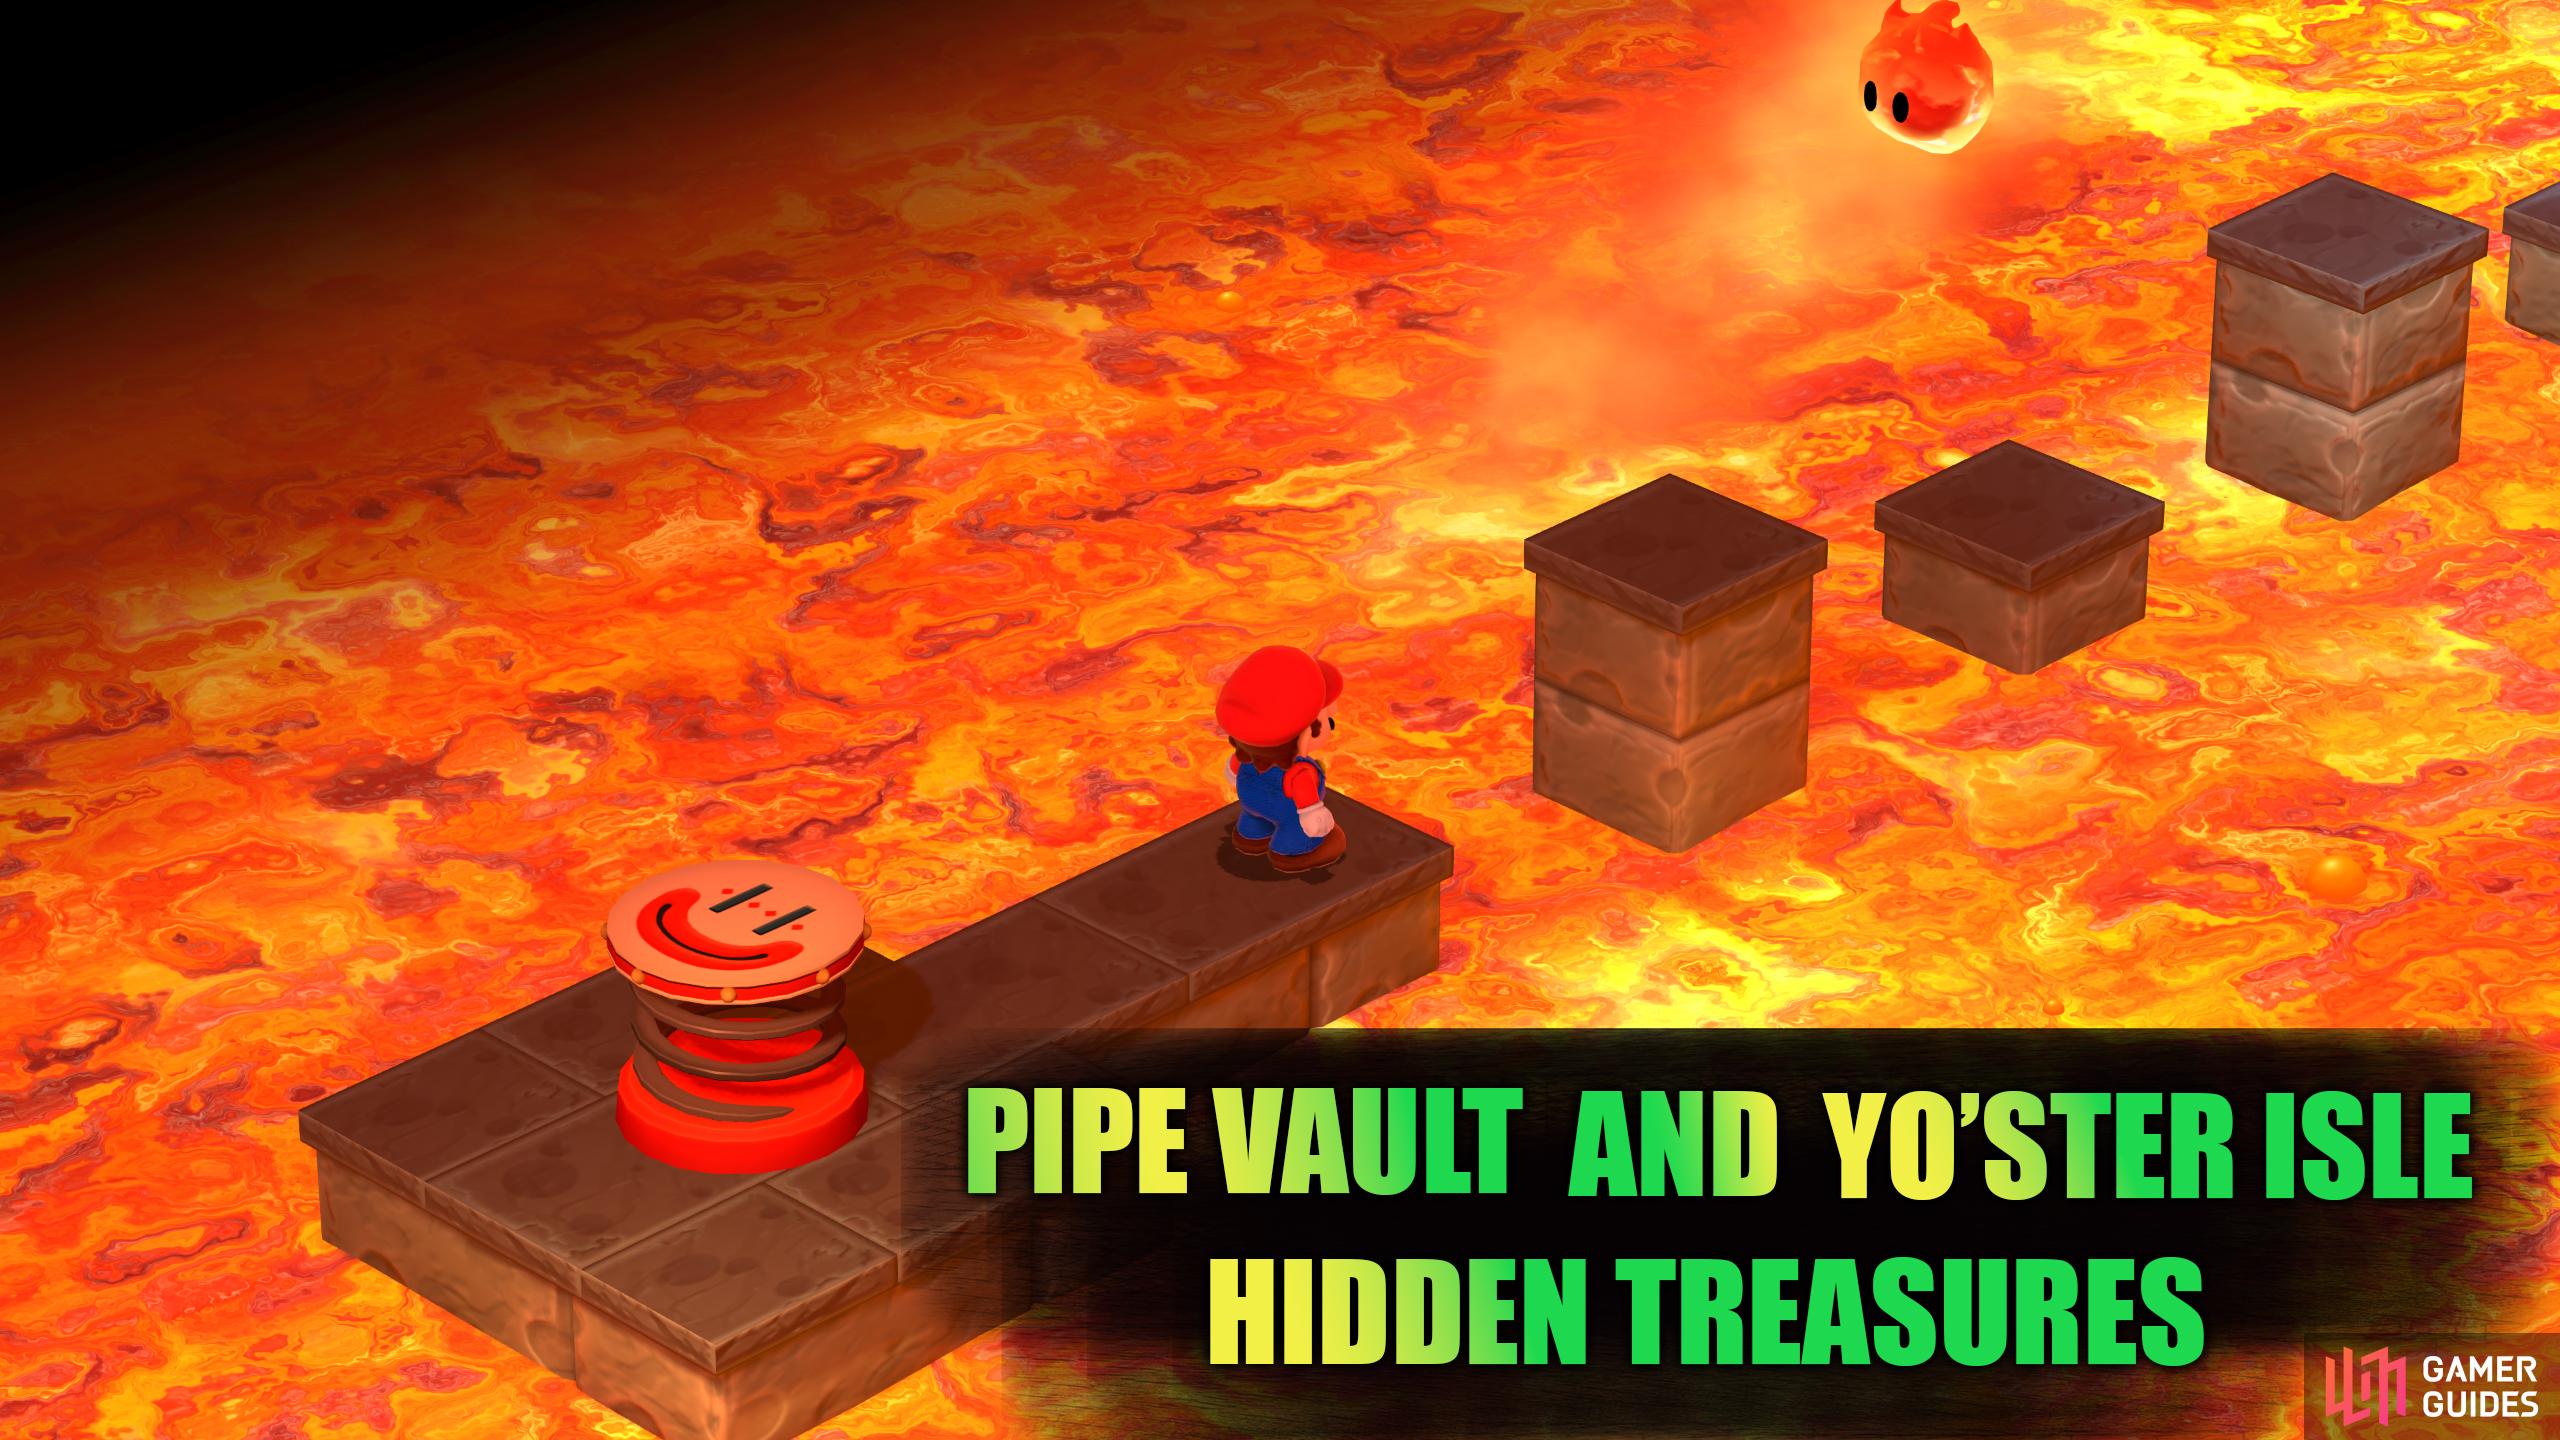 Pipe Vault is an optional area that has two hidden treasures. It's also the only way to reach Yo'ster Isle.